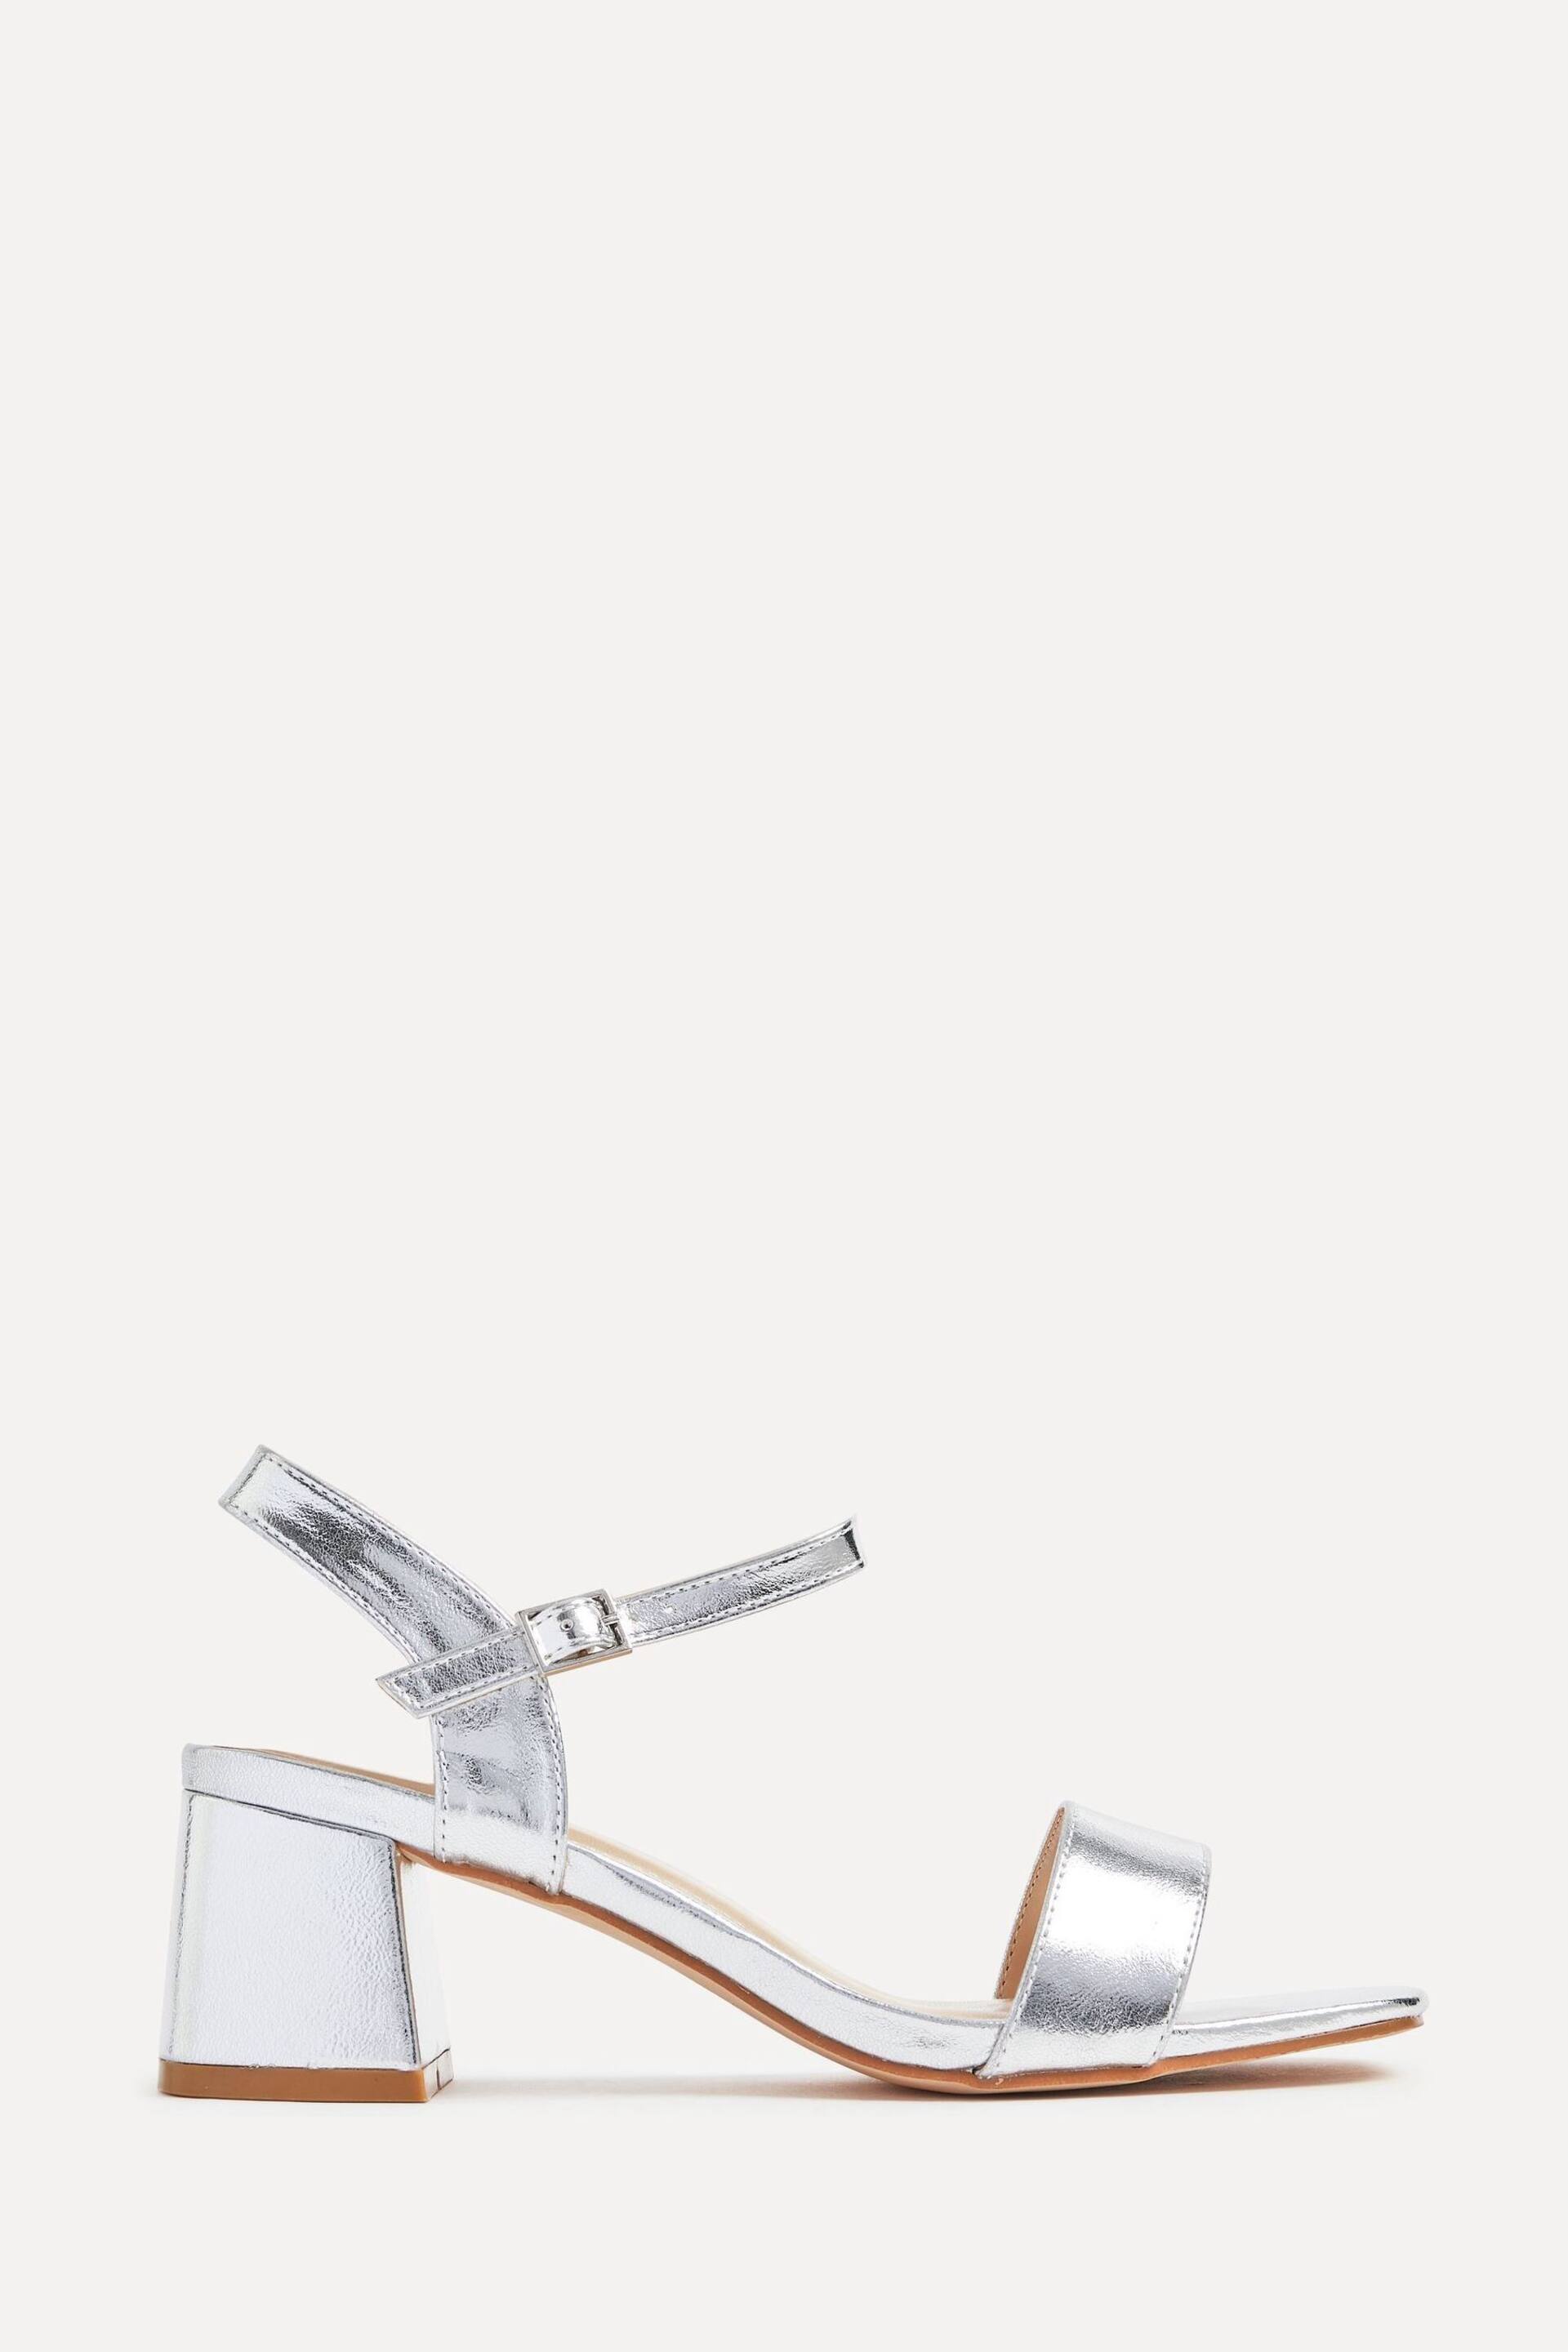 Linzi Silver Darcie Barely There Block Heeled Sandals - Image 2 of 5